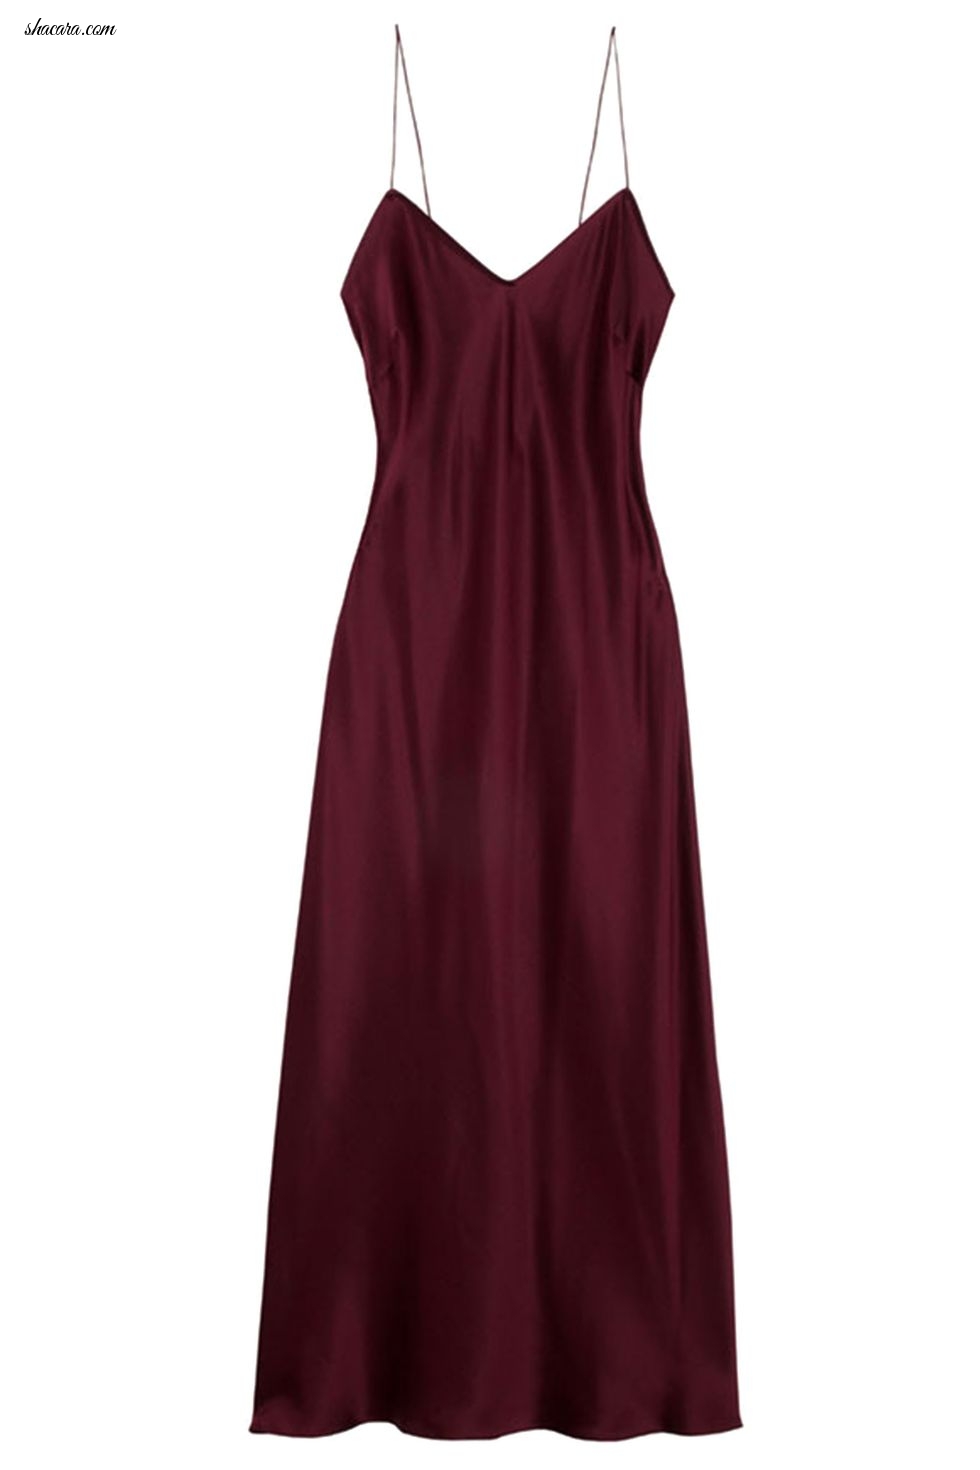 10 Date Night Dresses To Wear On Valentine’s Day